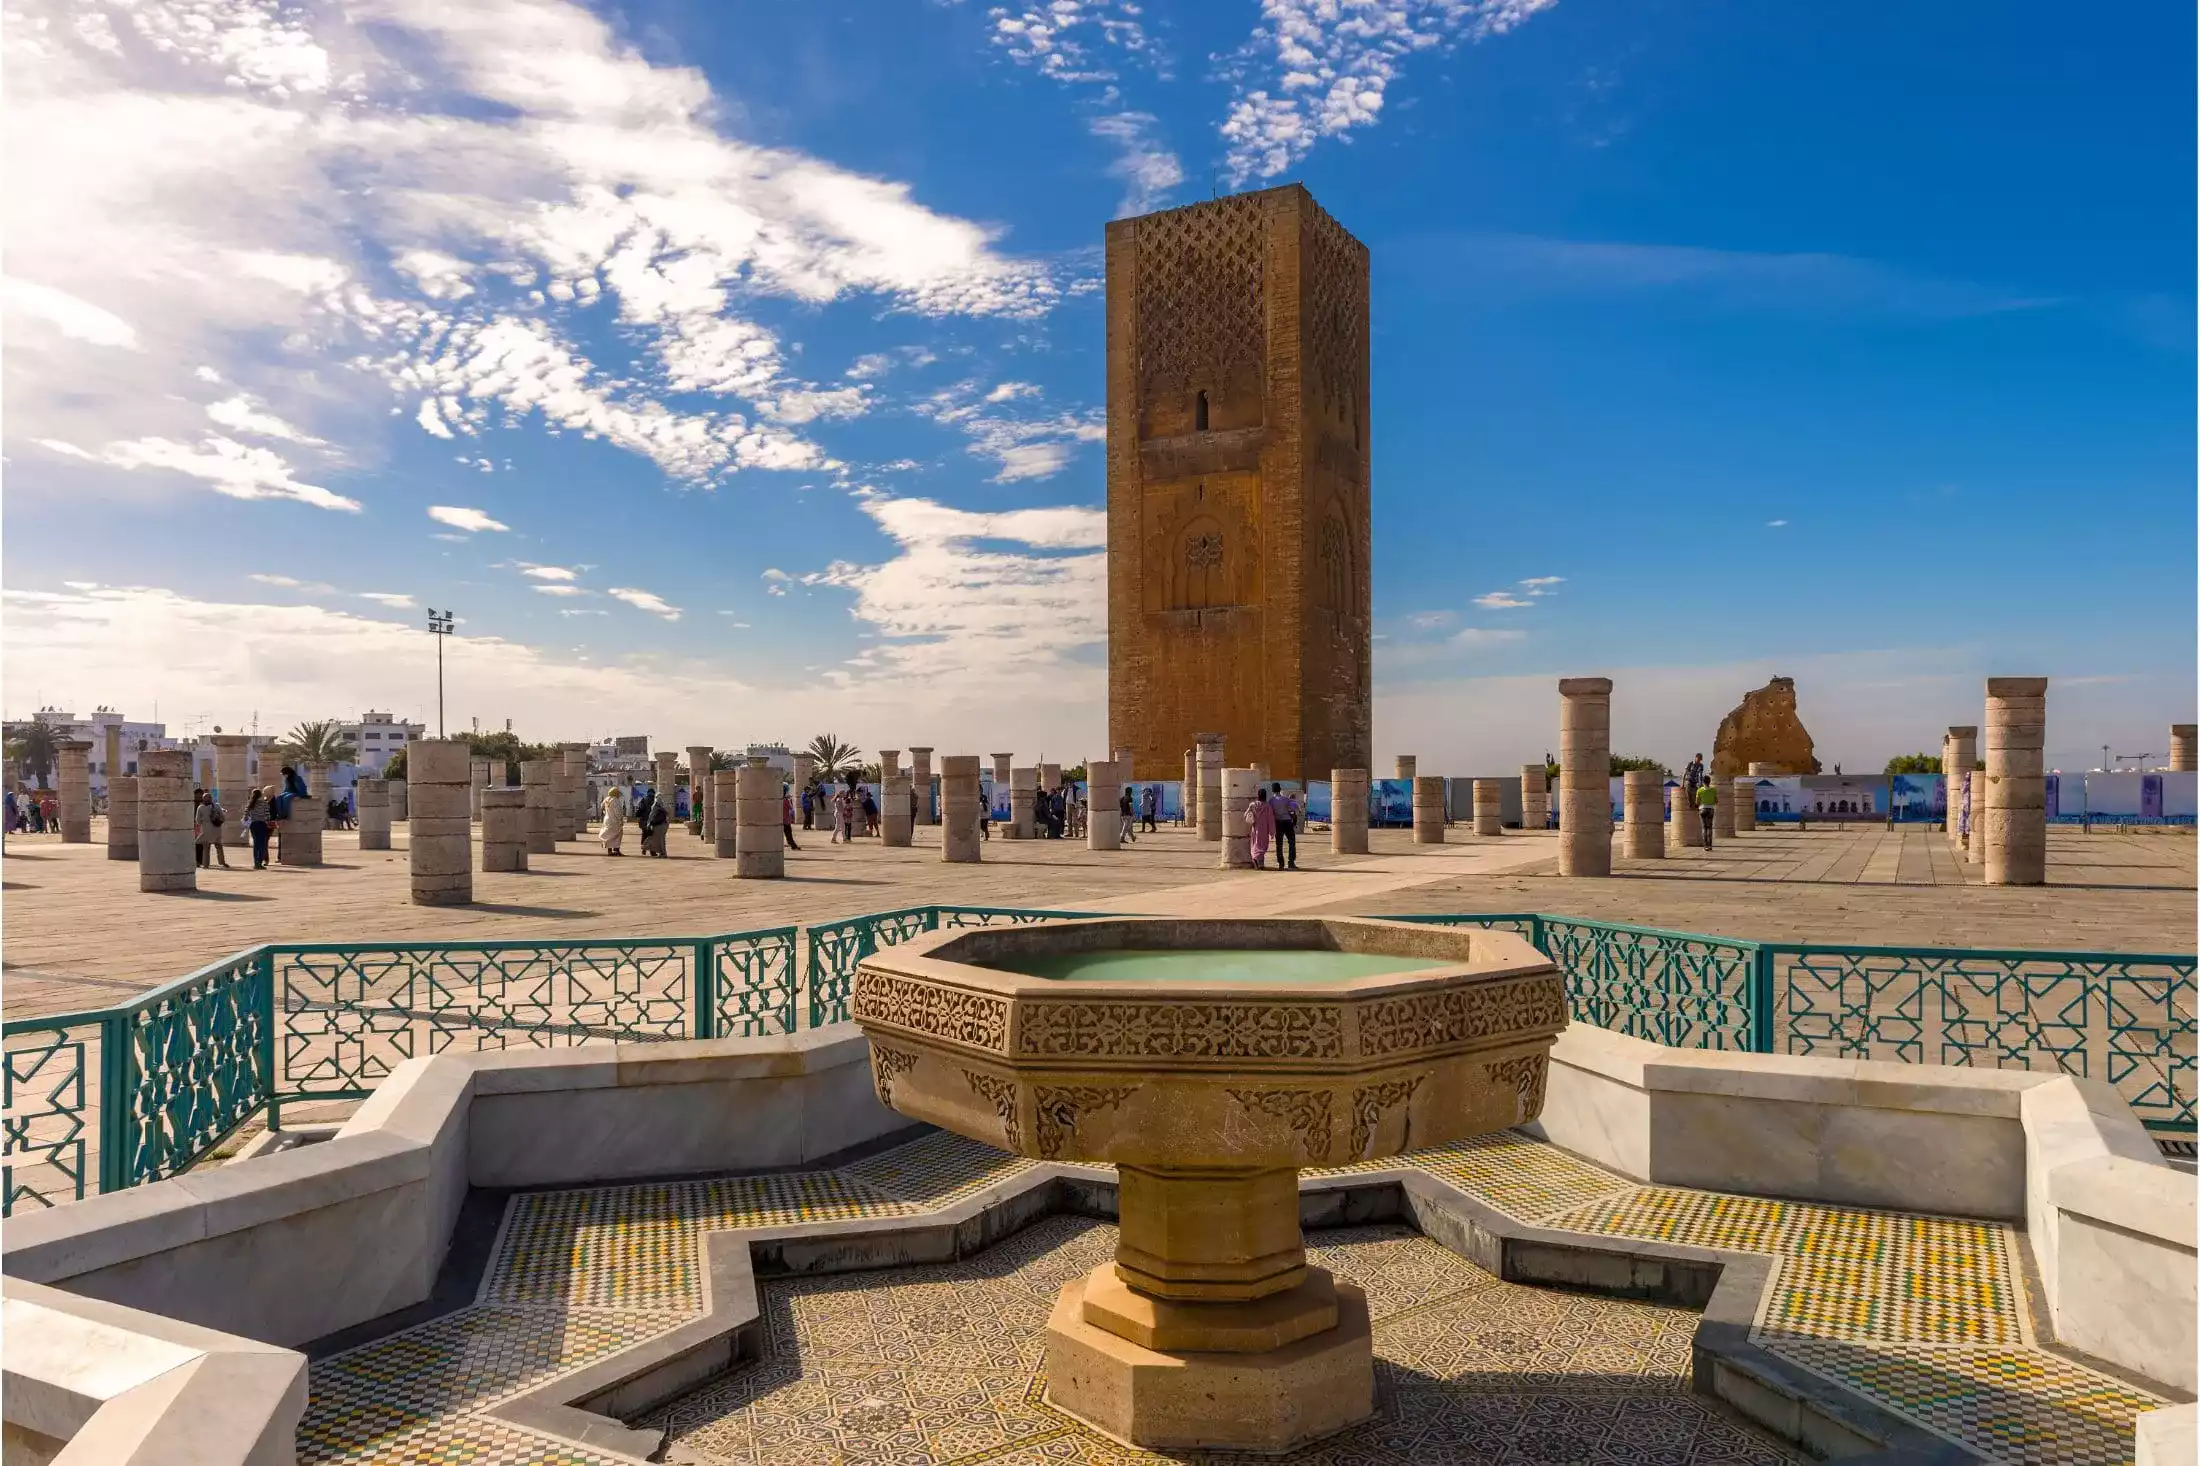 Hassan Tower in Rabat with visitors and an ornate fountain in front of it